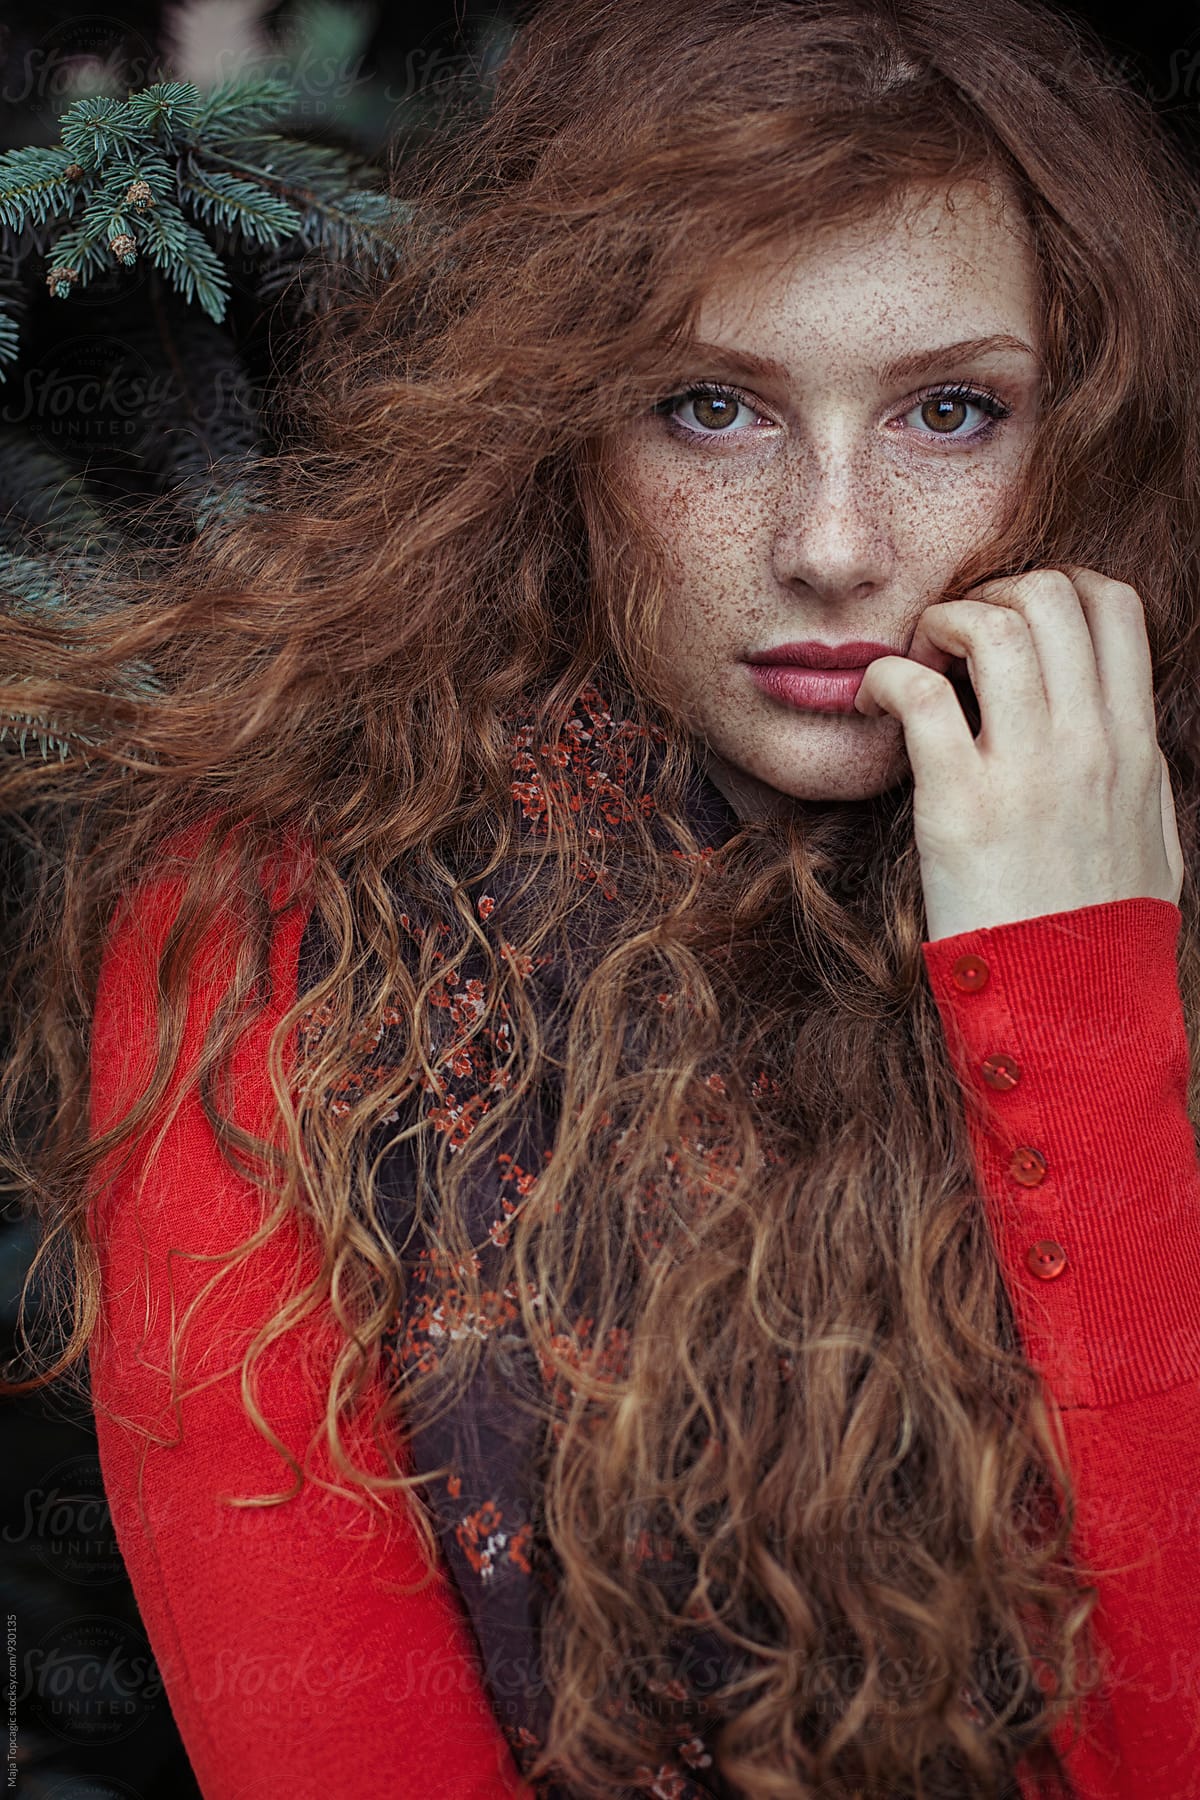 Portrait Of A Beautiful Redhead With Freckles By Stocksy Contributor